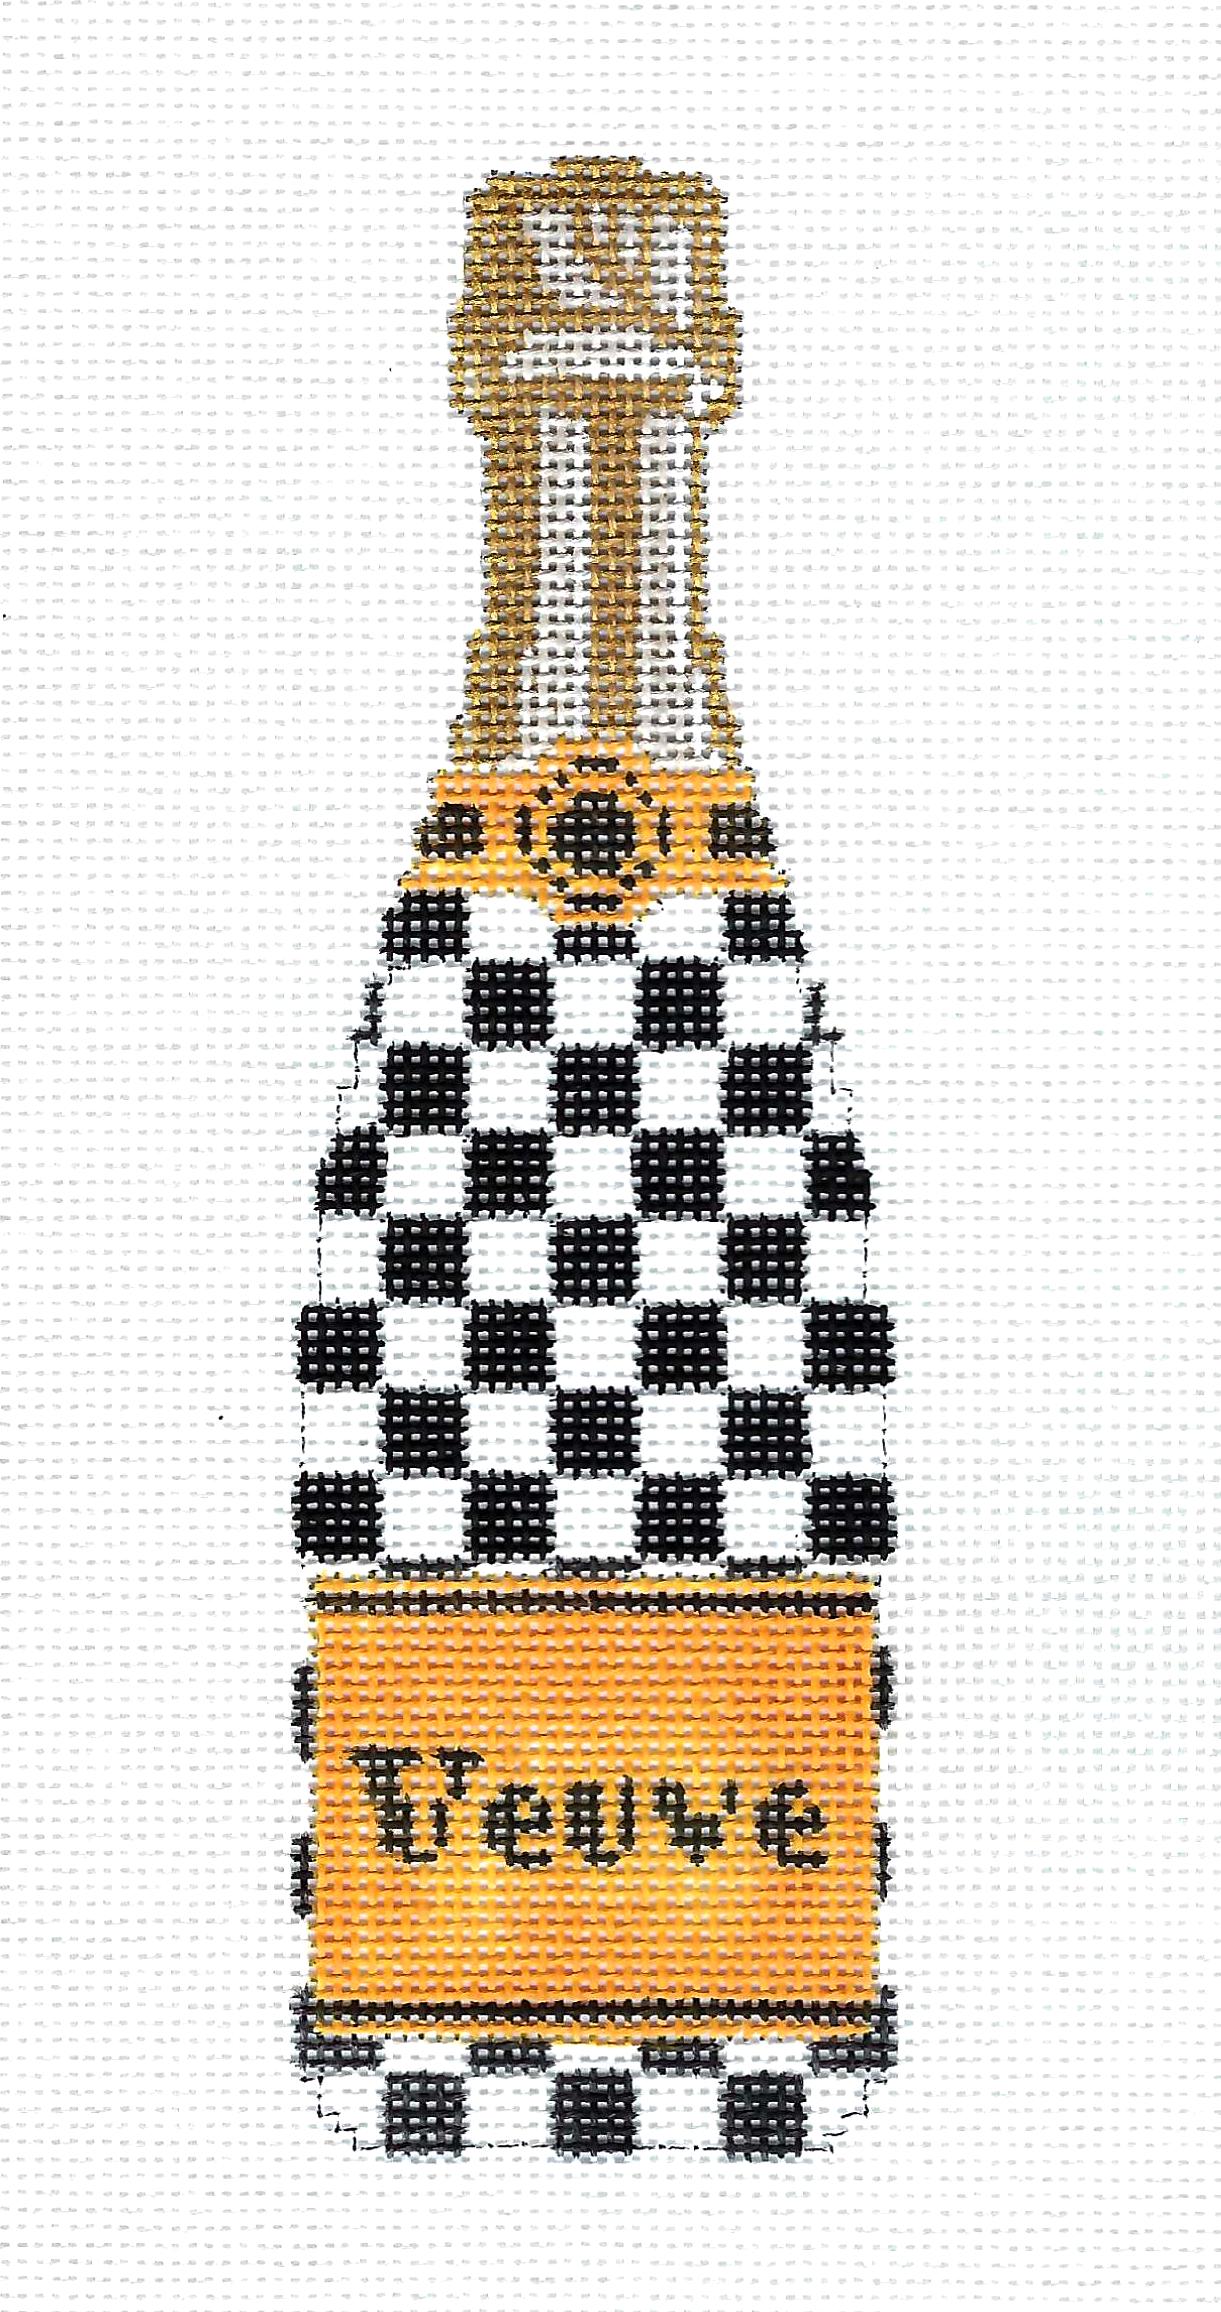 "Veuve" Champagne Bottle in Mackenzie Check Design handpainted Needlepoint Canvas by C'ate La Vie